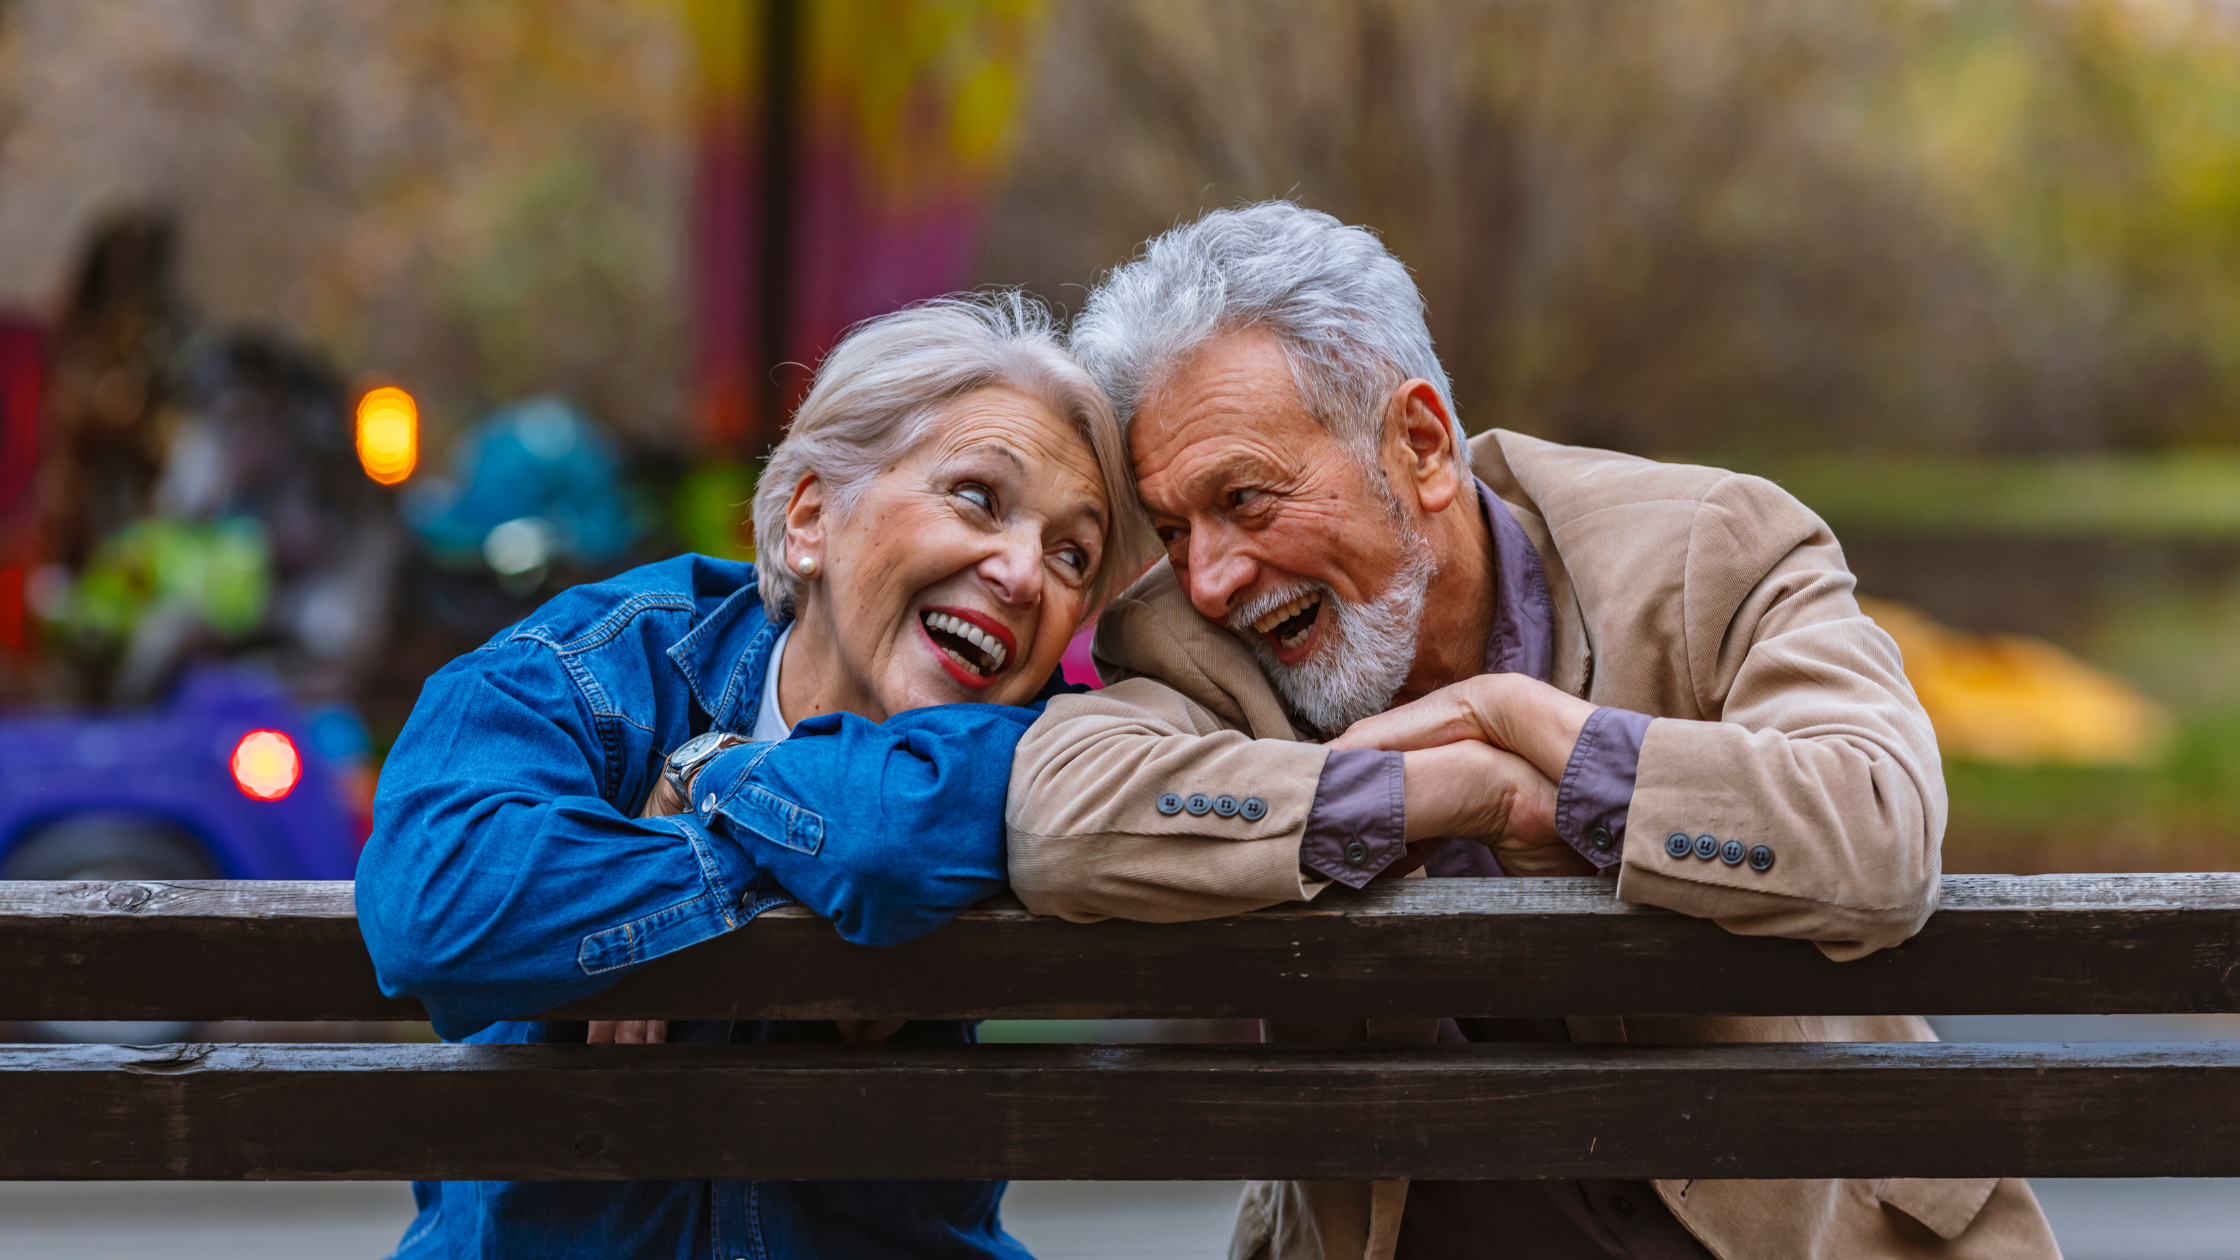 Retired couple looking at each other laughing in the park on a bench.